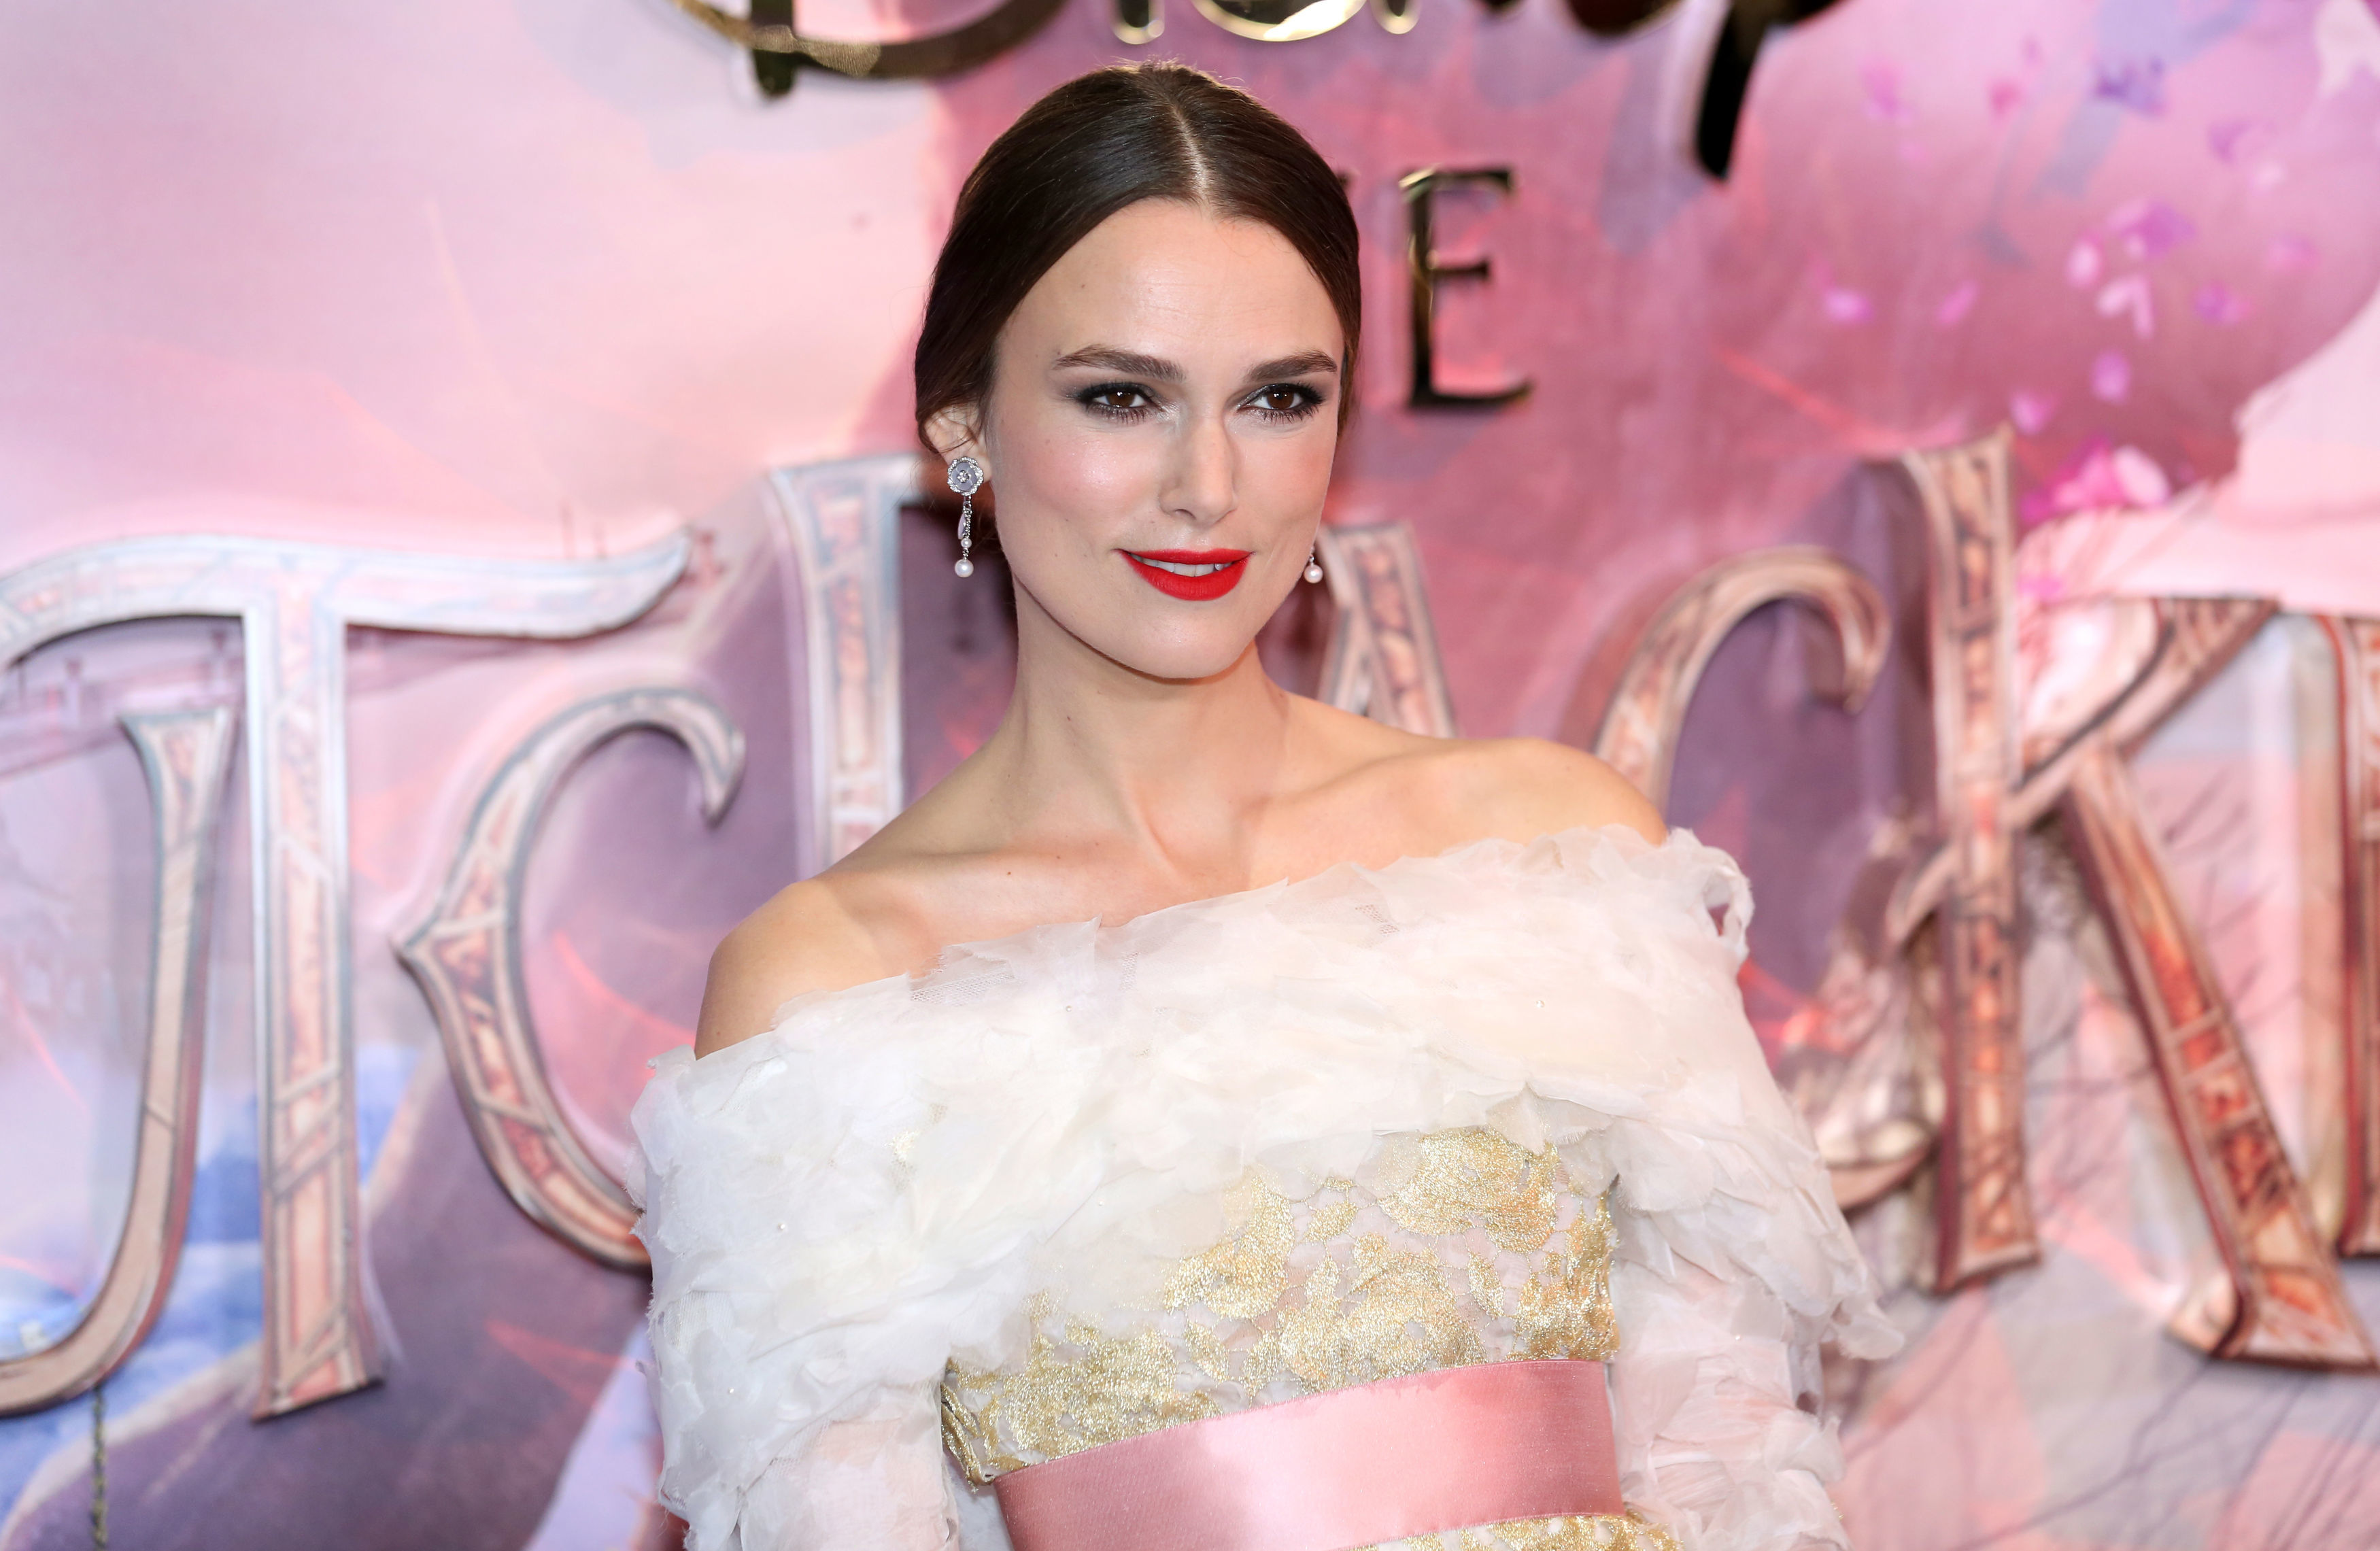 Keira Knightley at the Vue, Westfield London. | Source: Getty Images